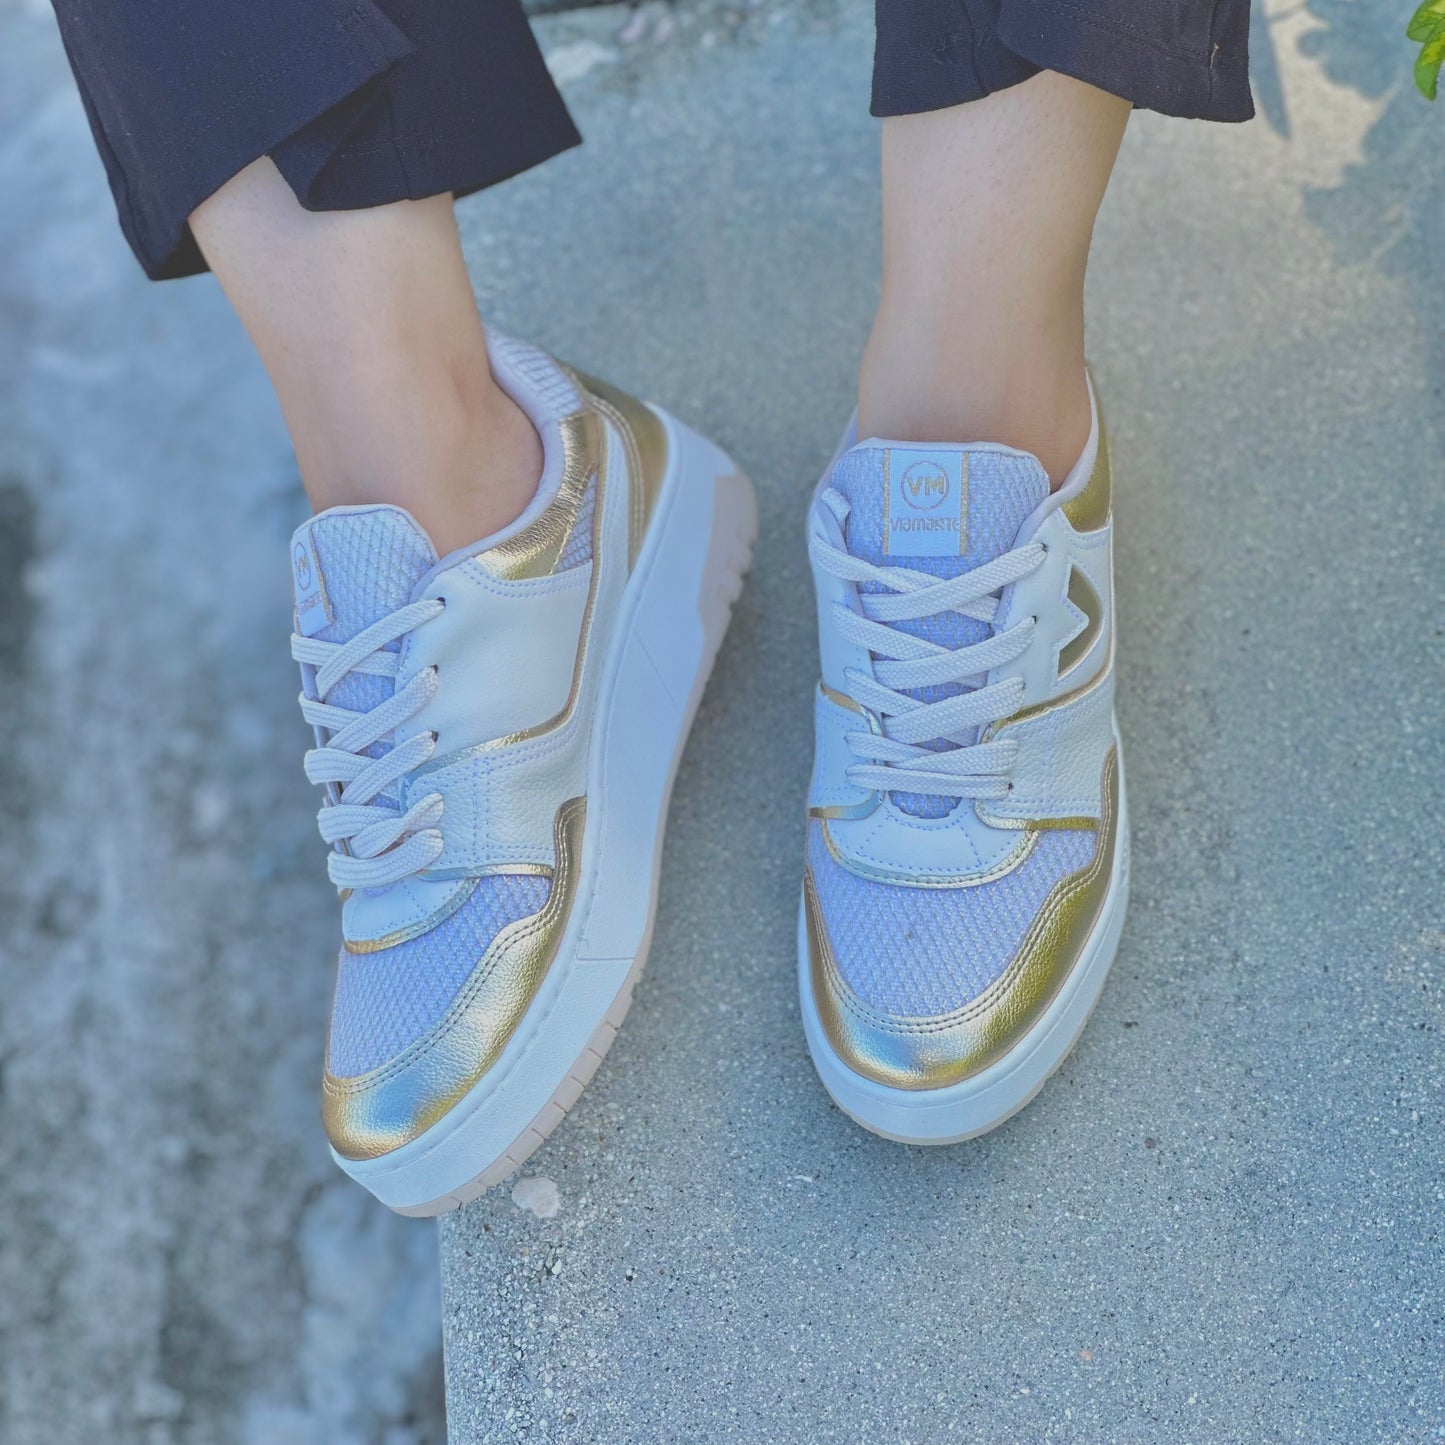 Anais gold accents sneaker